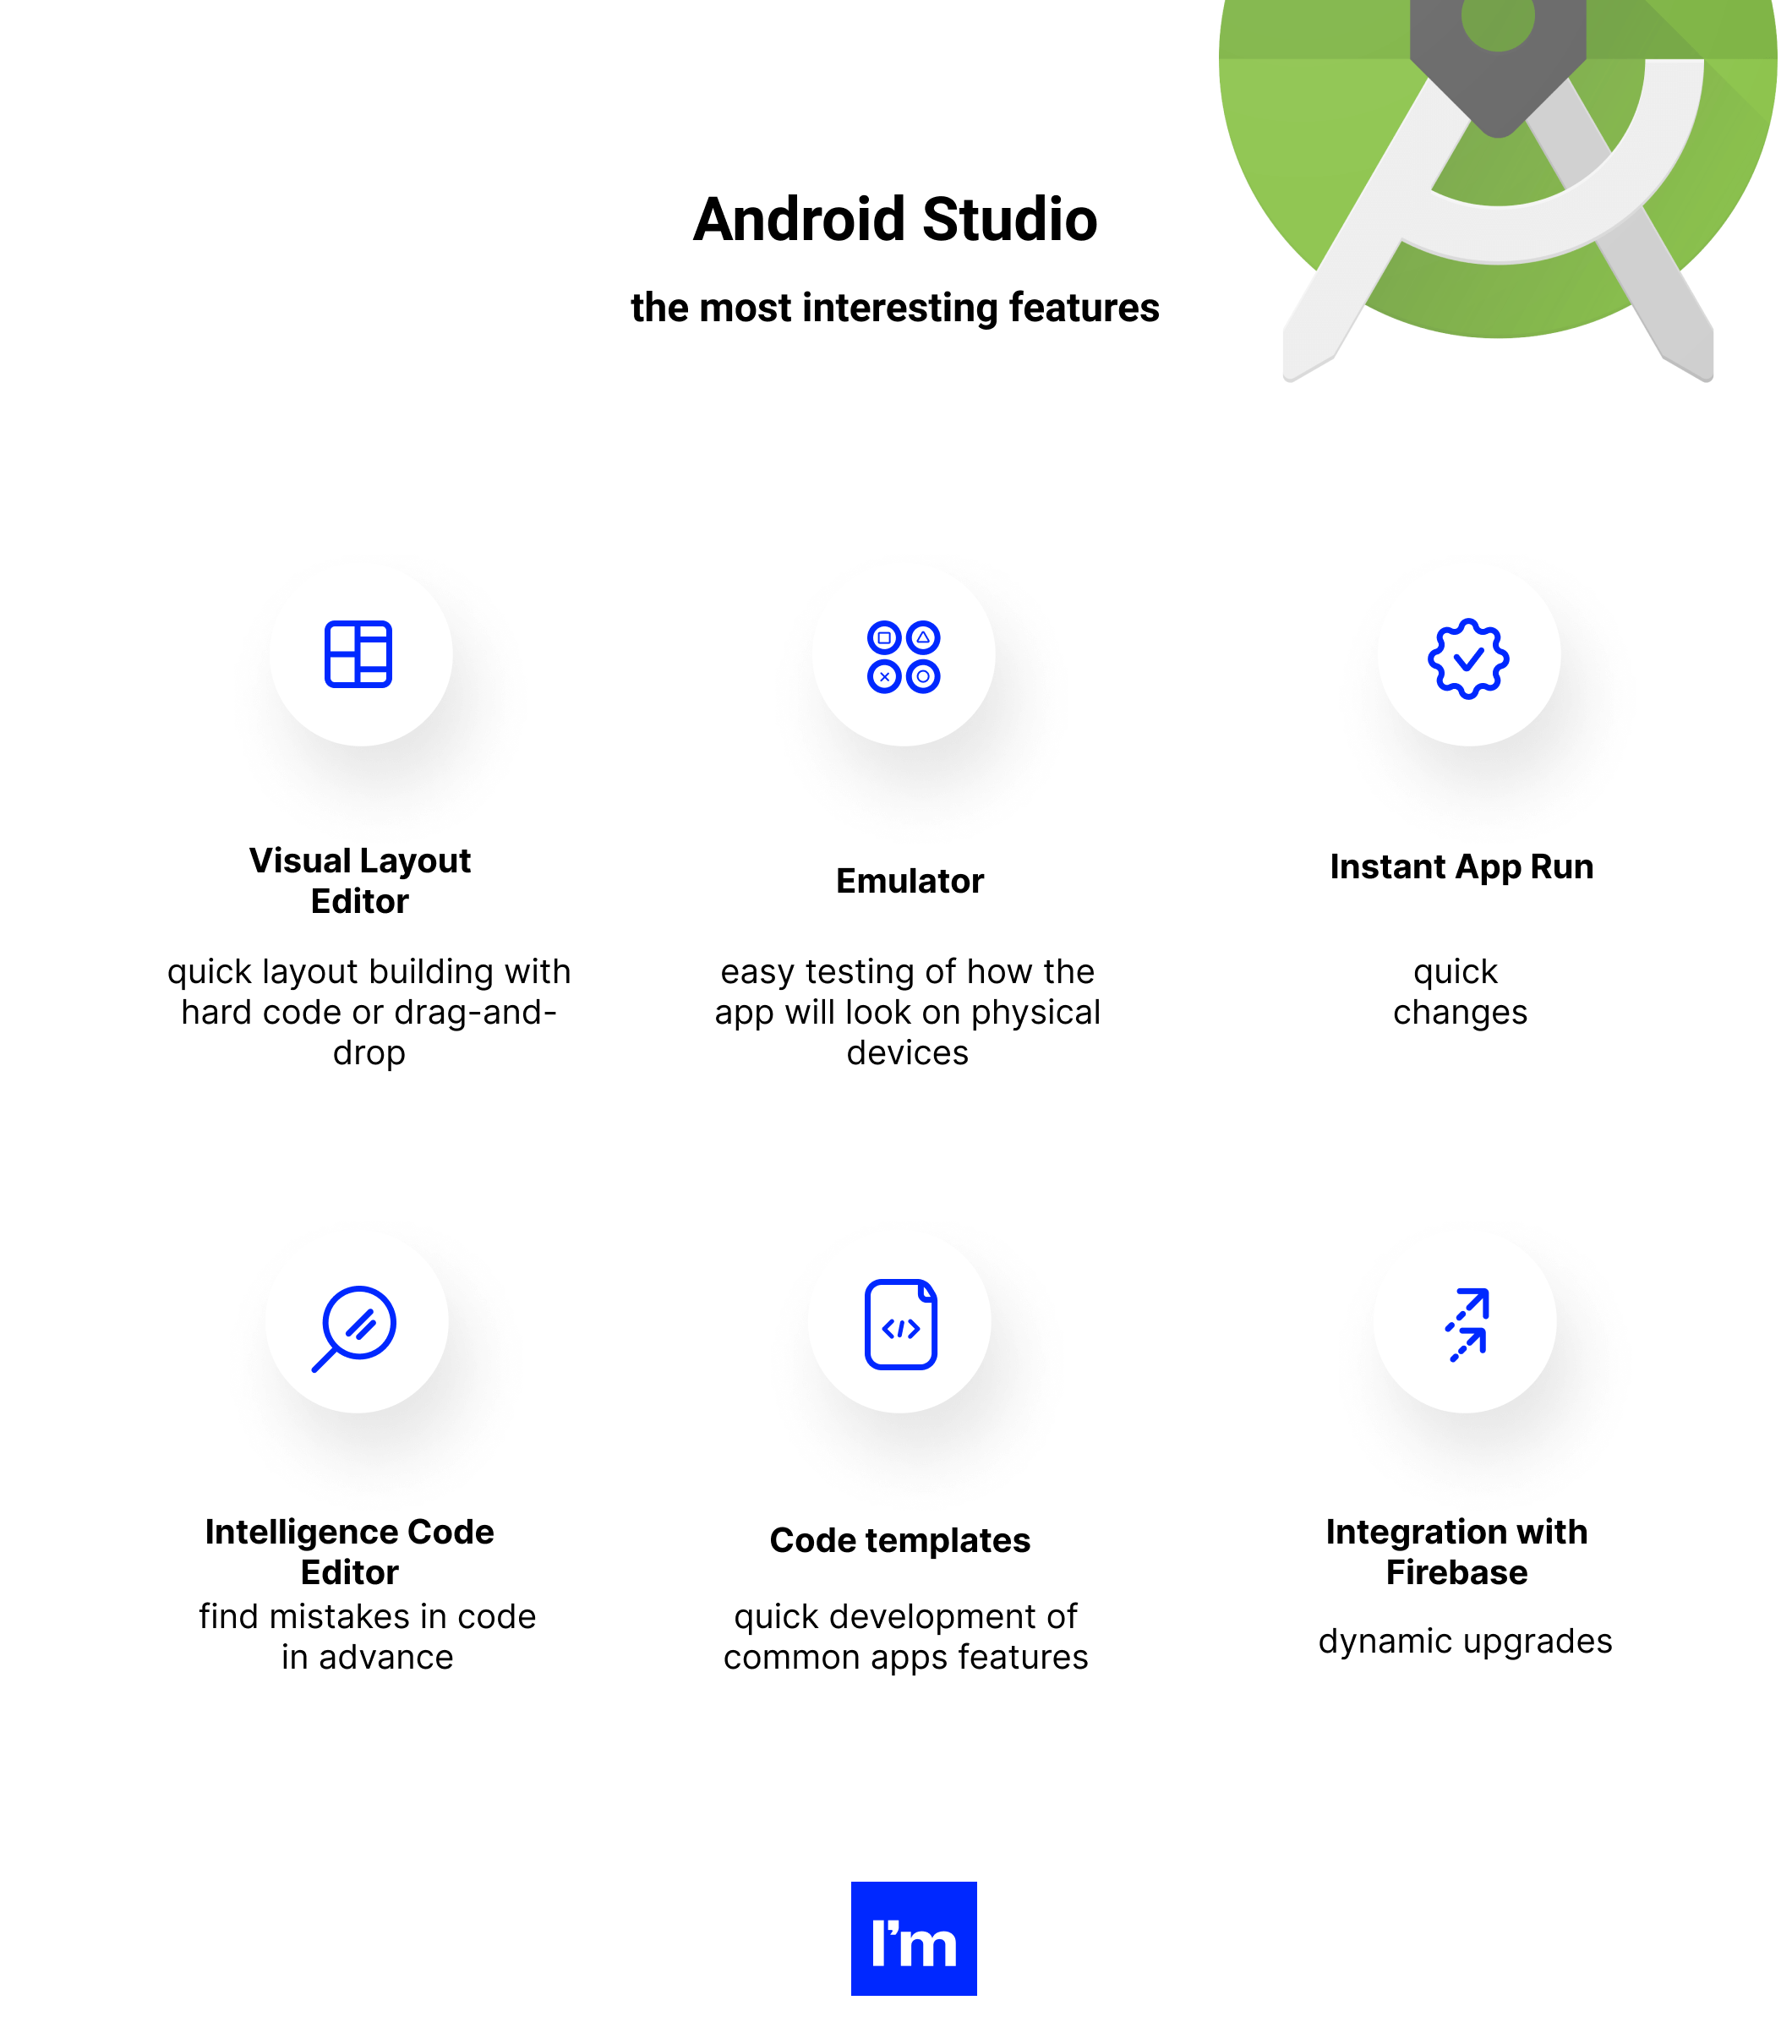 infographic 1 - features of Android Studio